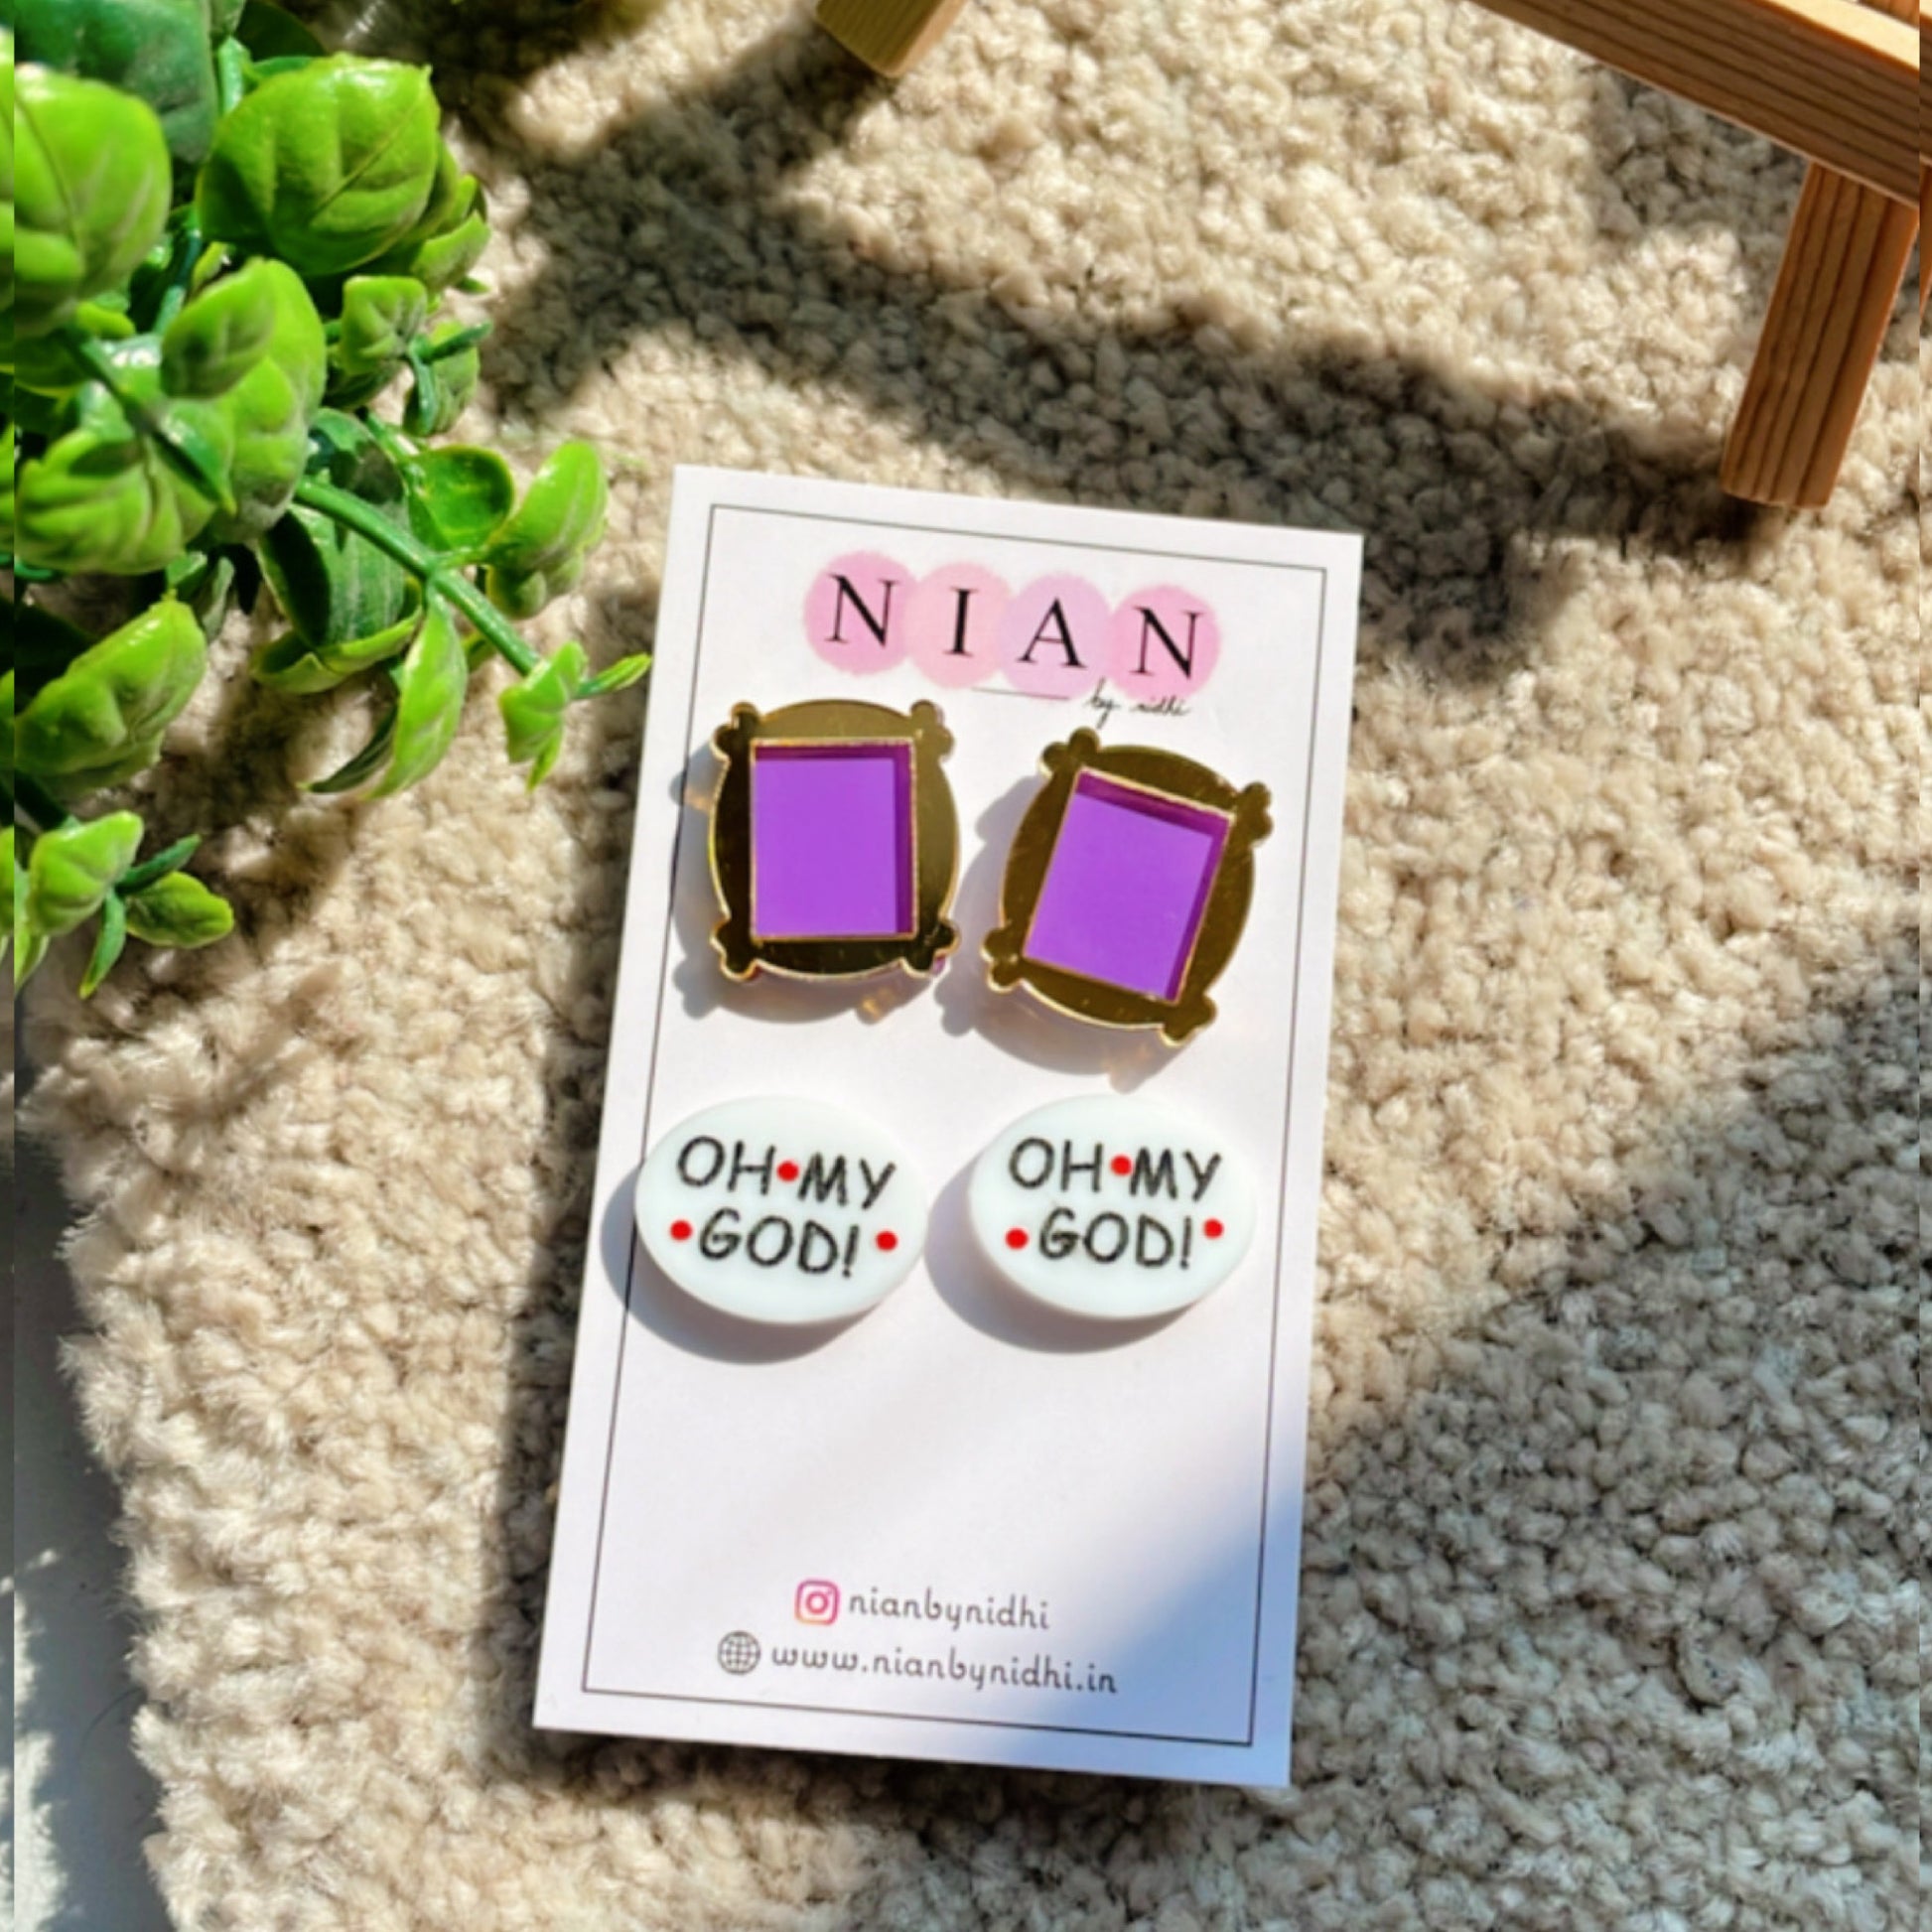 Friends Studs (Set of 2) - Monica's Frame Studs (Purple and Golden) + Oh My God Studs (White) - Nian by Nidhi - placed in a light beige background 